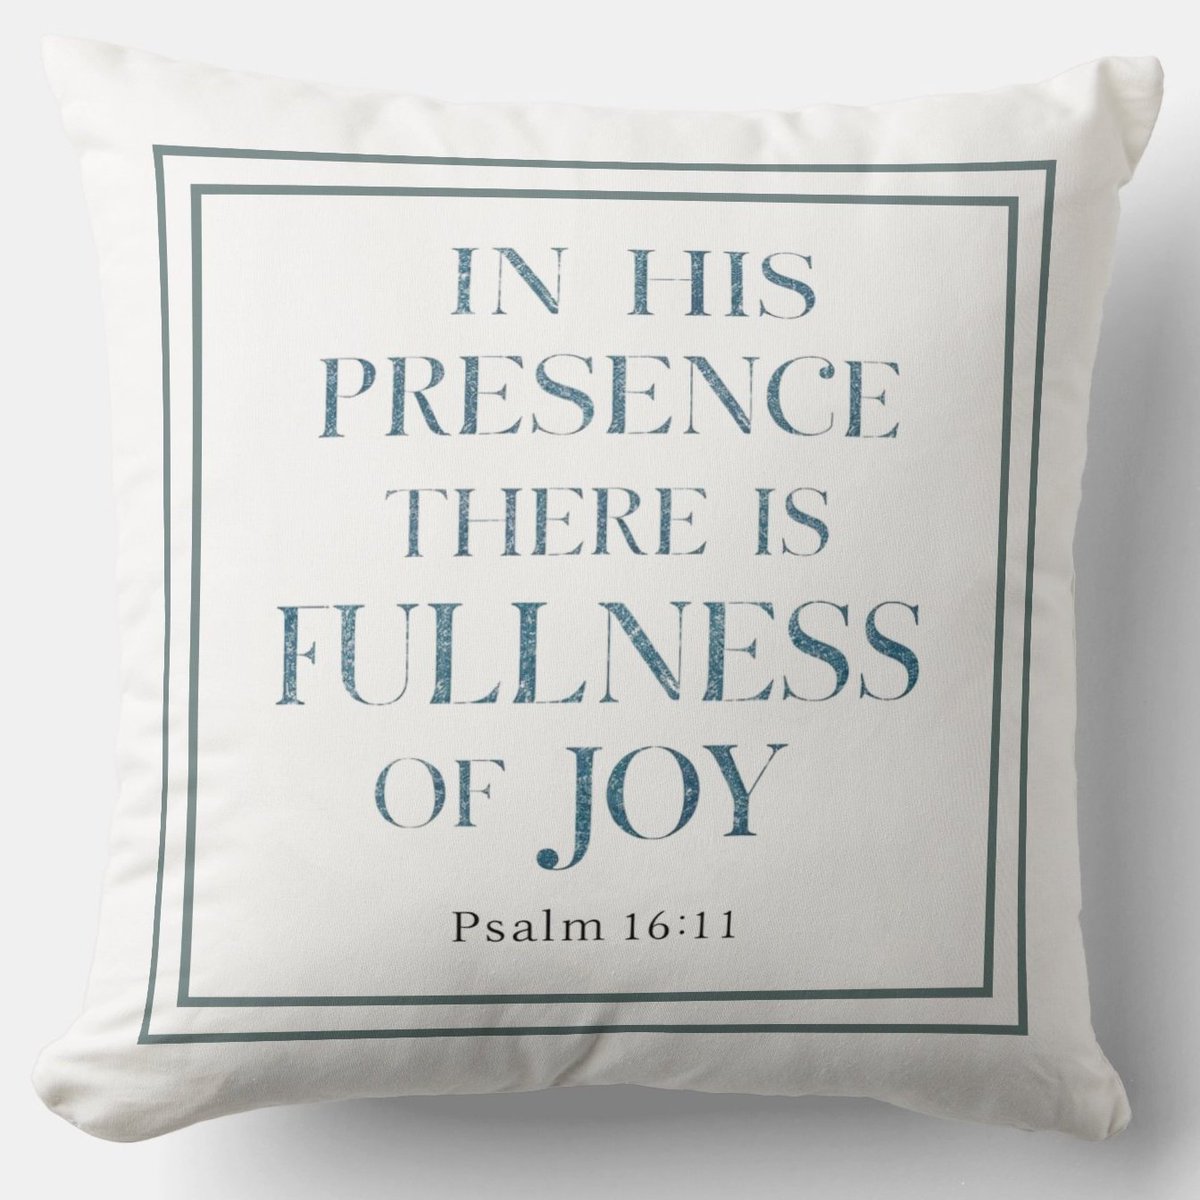 In His Presence There Is Fullness Of Joy zazzle.com/in_his_presenc… Throw #Pillow #Blessing #JesusChrist #JesusSaves #Jesus #christian #spiritual #Homedecoration #uniquegift #giftideas #MothersDayGifts #giftformom #giftidea #HolySpirit #pillows #giftshop #giftsforher #giftsformom